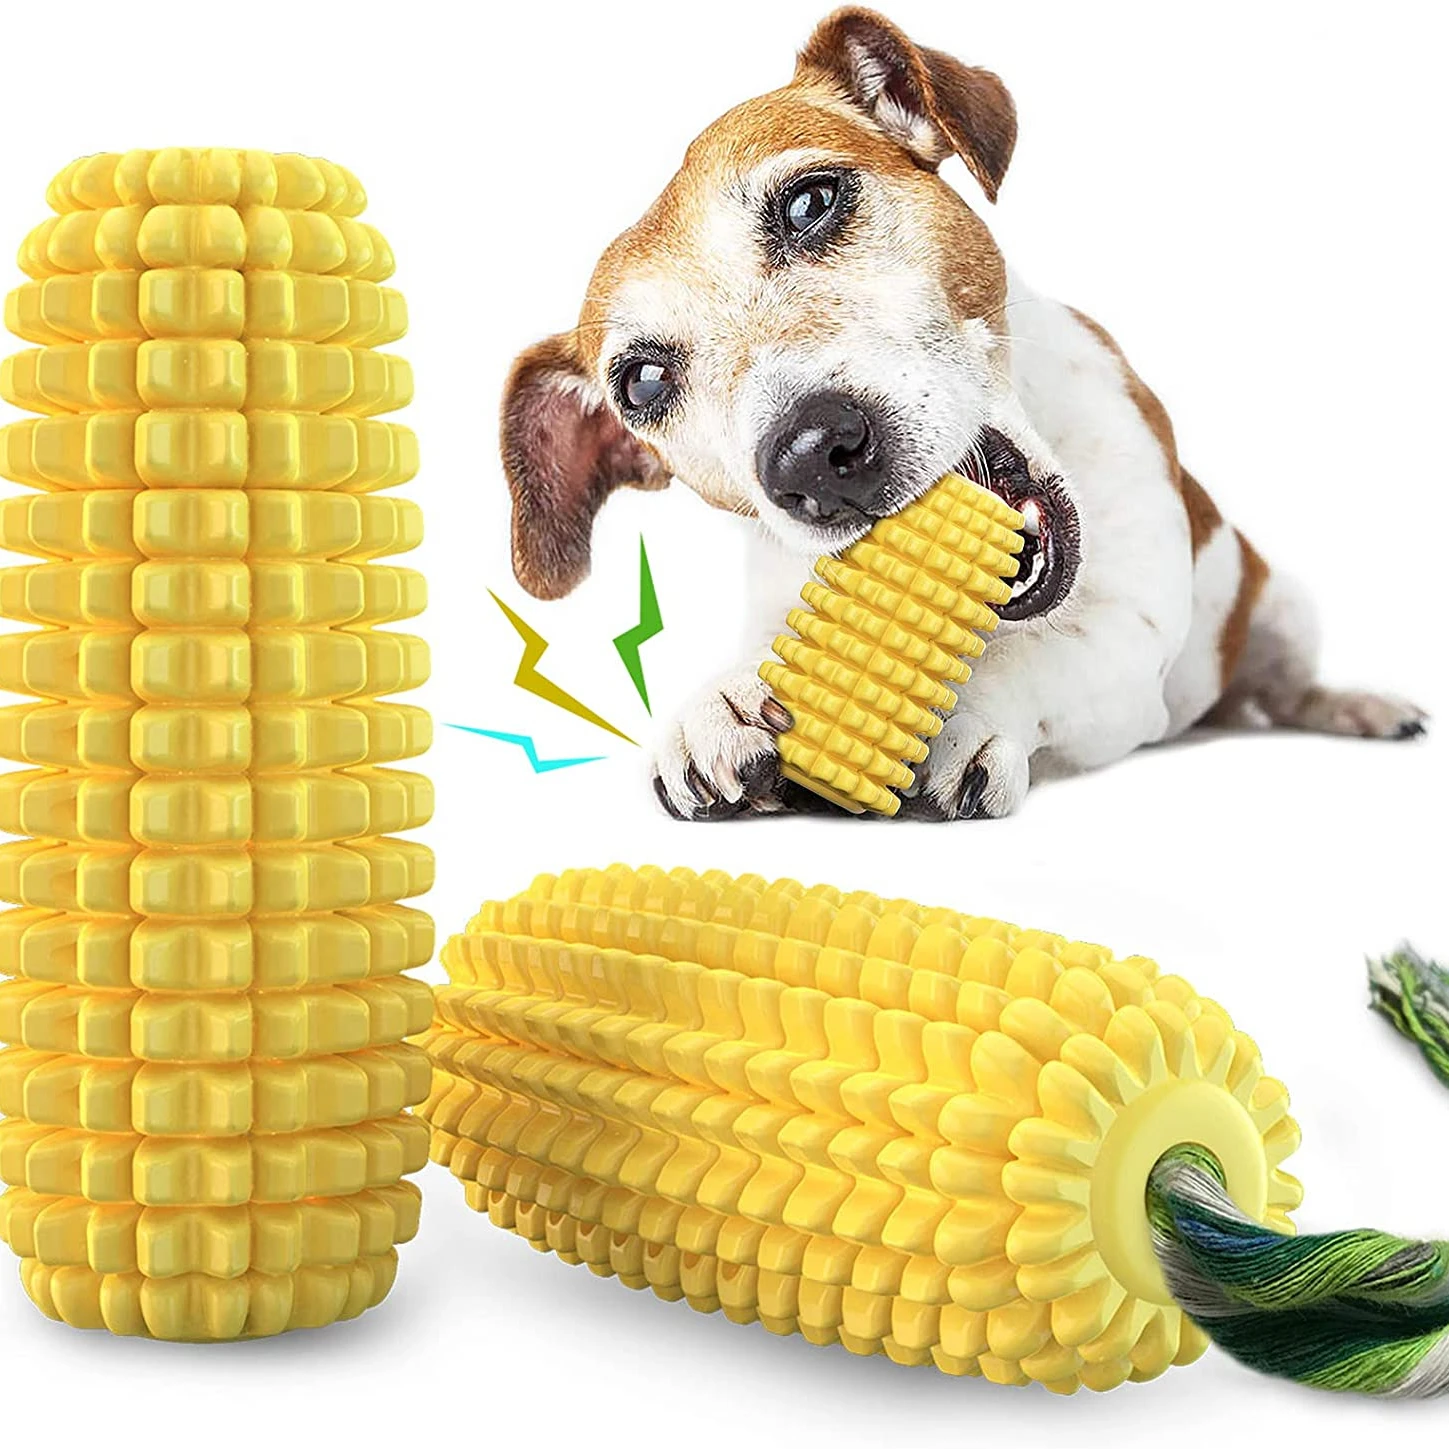 

Dog Chew Toys Puppy Toothbrush Clean Teeth Interactive Corn Toys Aggressive Squeak Chewers Small Meduium Large Breed